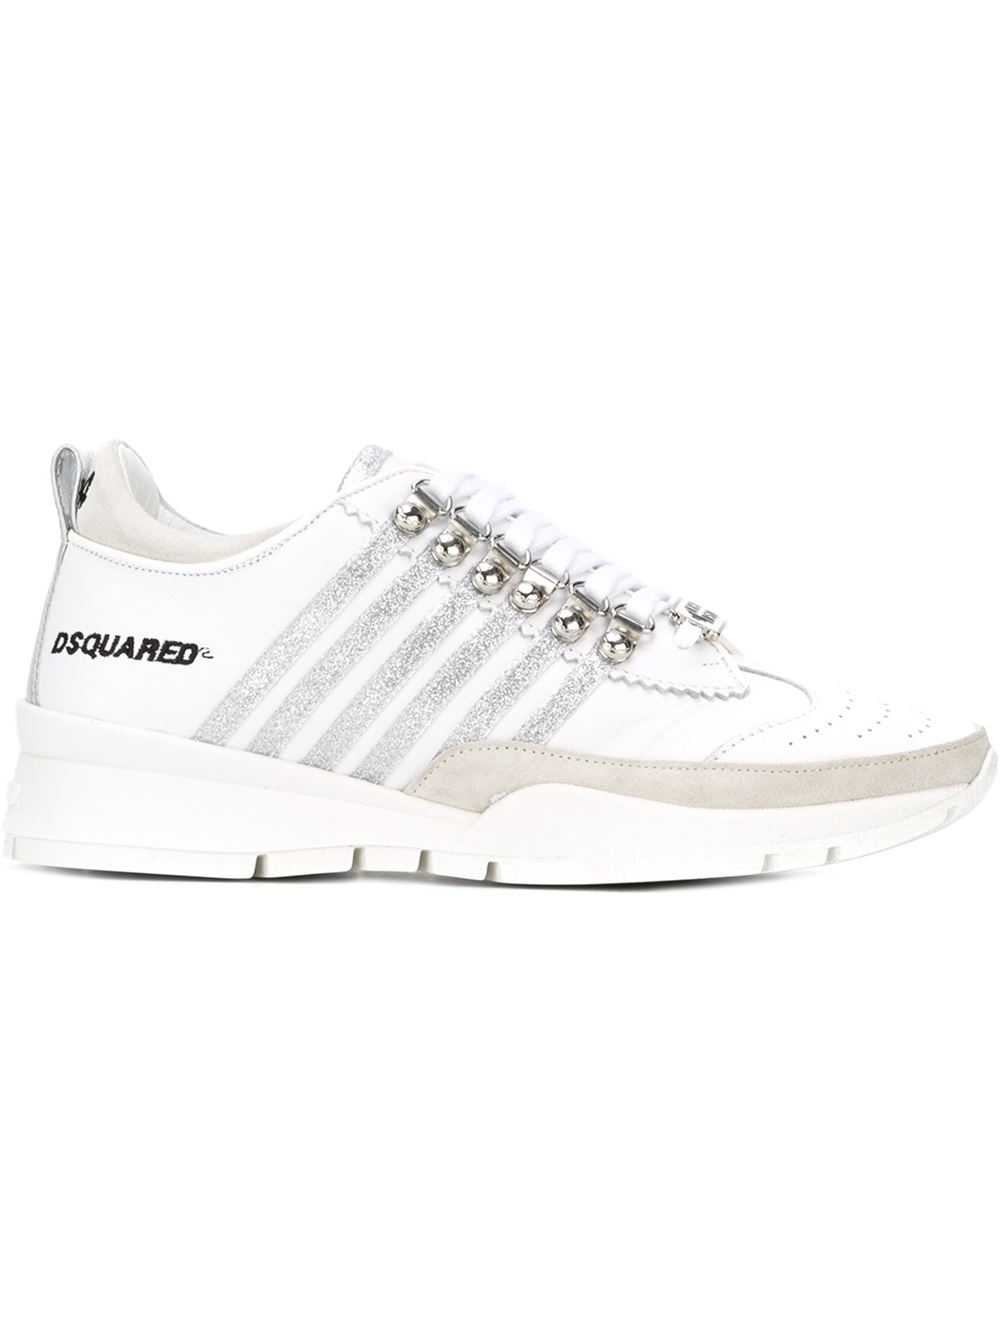 dsquared sneakers pas cher